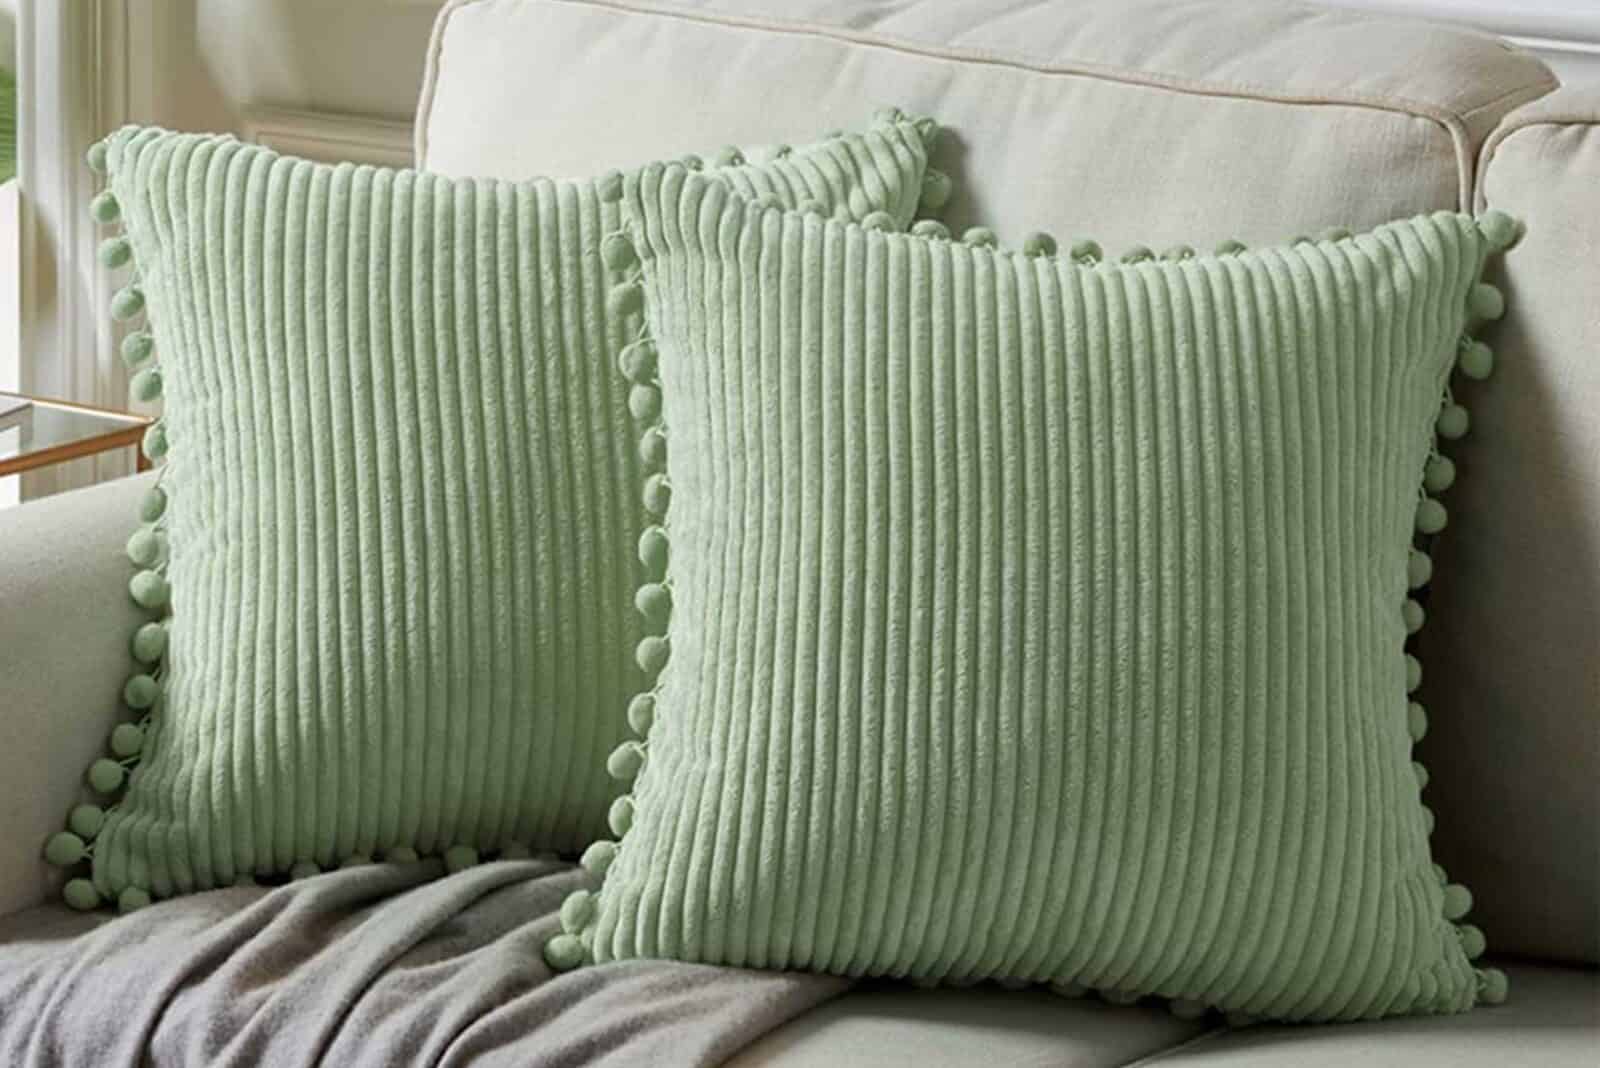 Simple Spring Decorating Ideas - House by Hoff  Throw pillows bedroom,  Green throw pillows, Home decor accessories